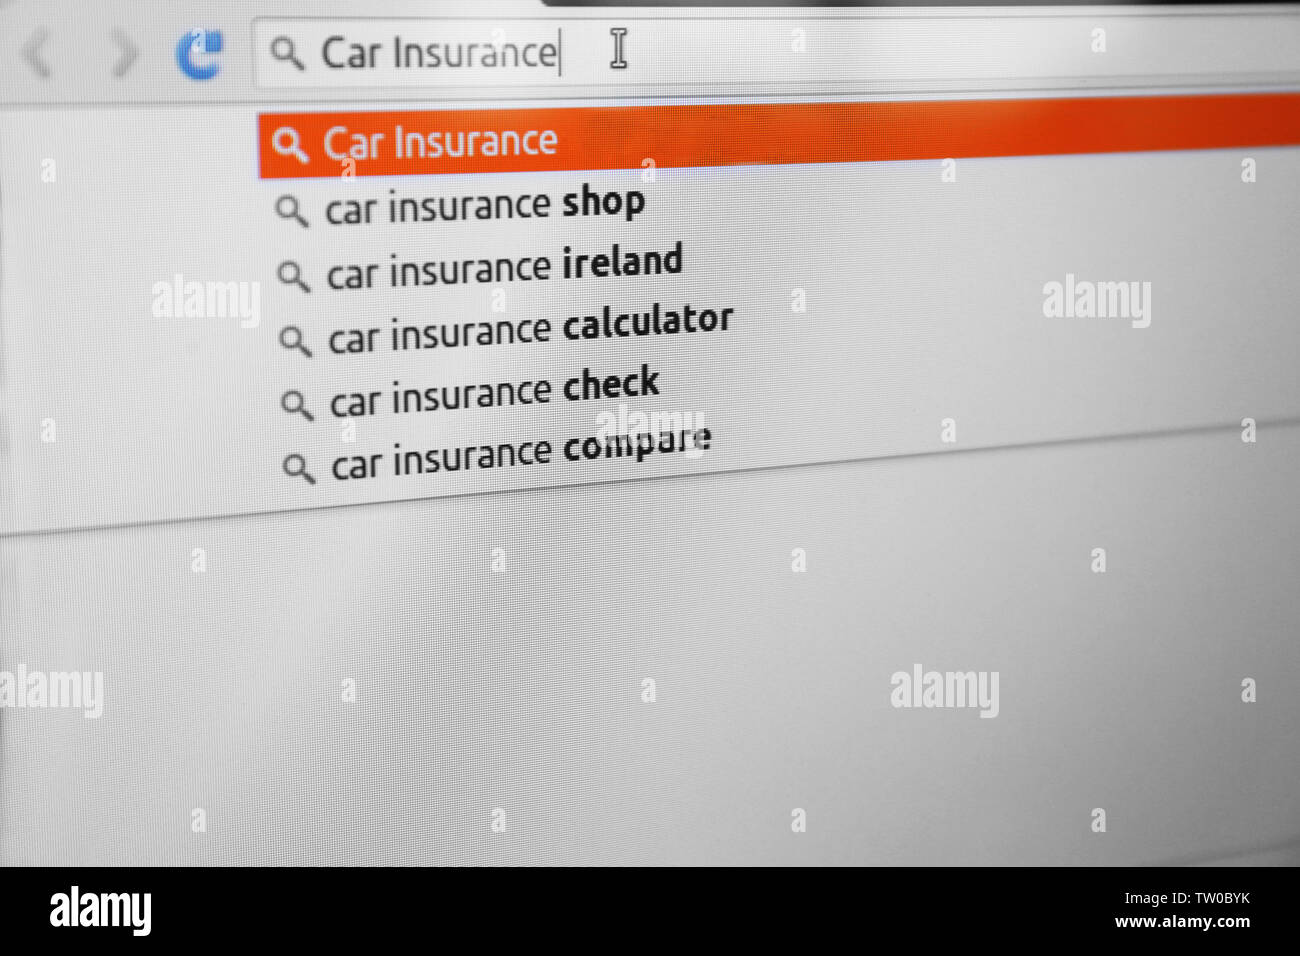 Web searching of car insurance information Stock Photo